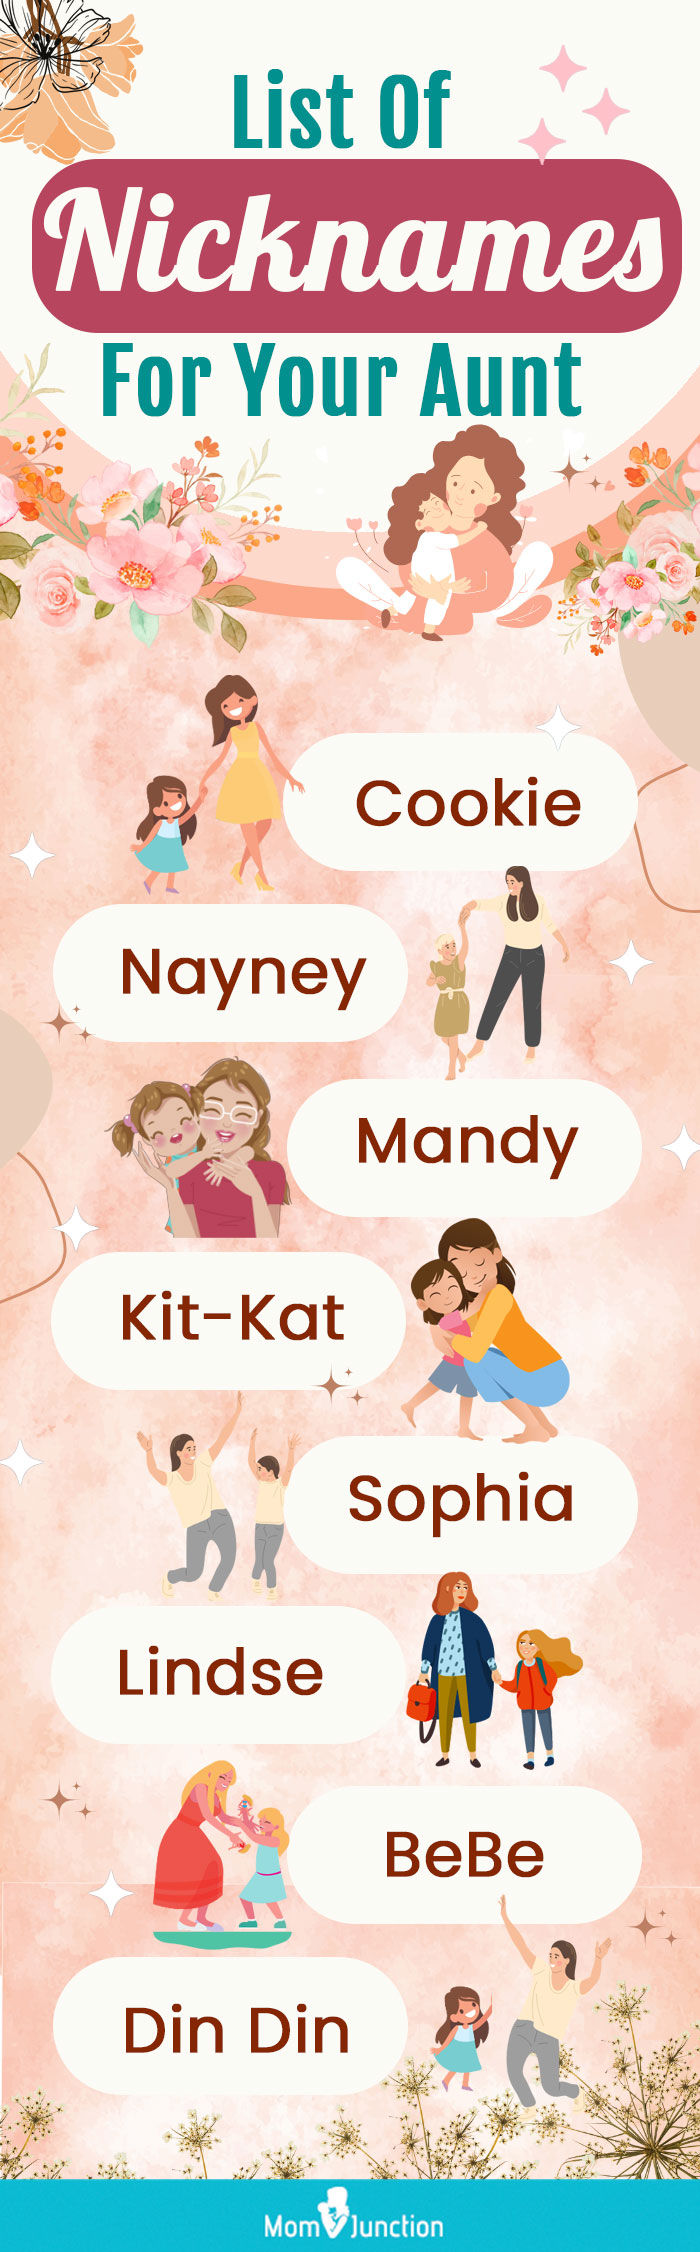 list of nicknames for your aunt (infographic)